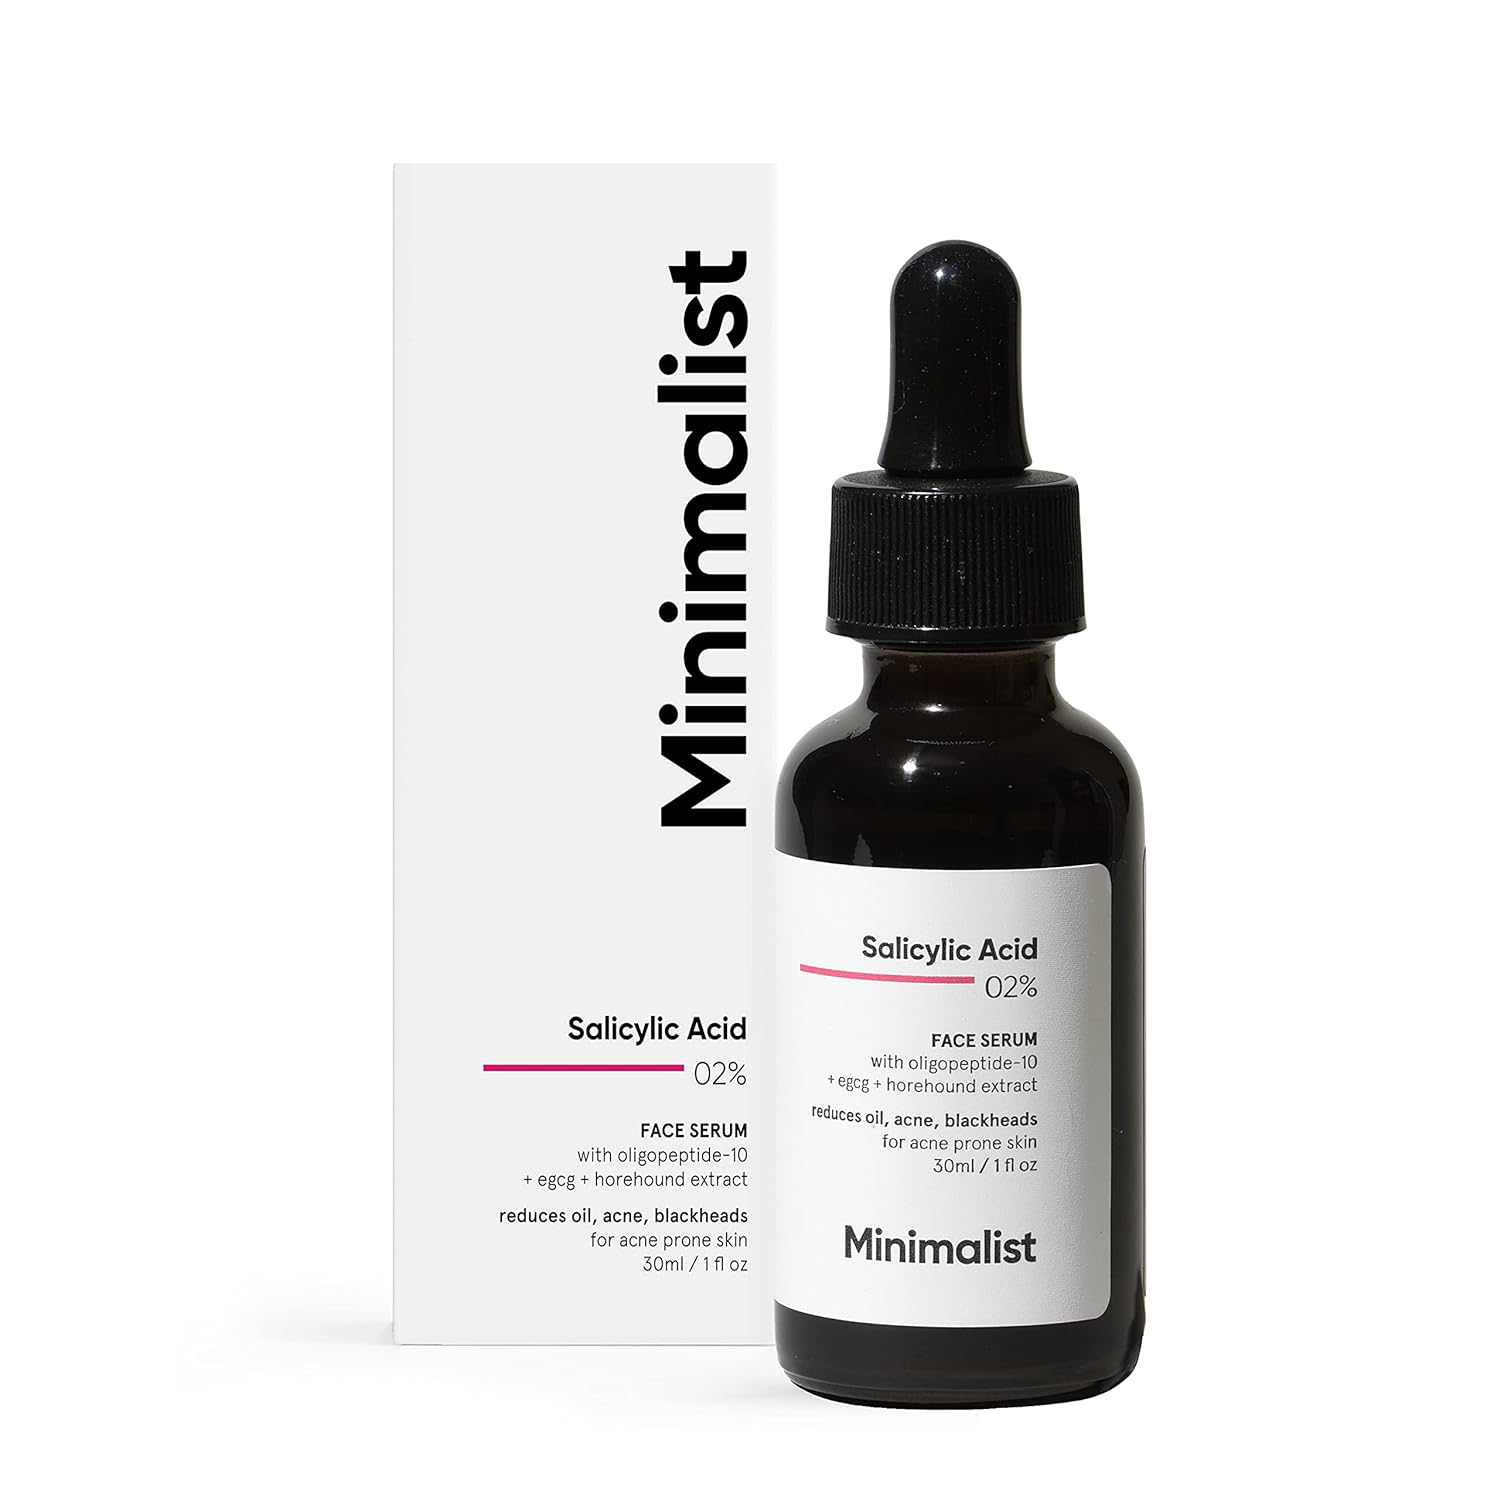 Minimalist 2% Salicylic Acid Serum For Acne, Blackheads & Open Pores 30ml | Reduces Excess Oil & Bumpy Texture | BHA Based Exfoliant for Acne Prone or Oily Skin